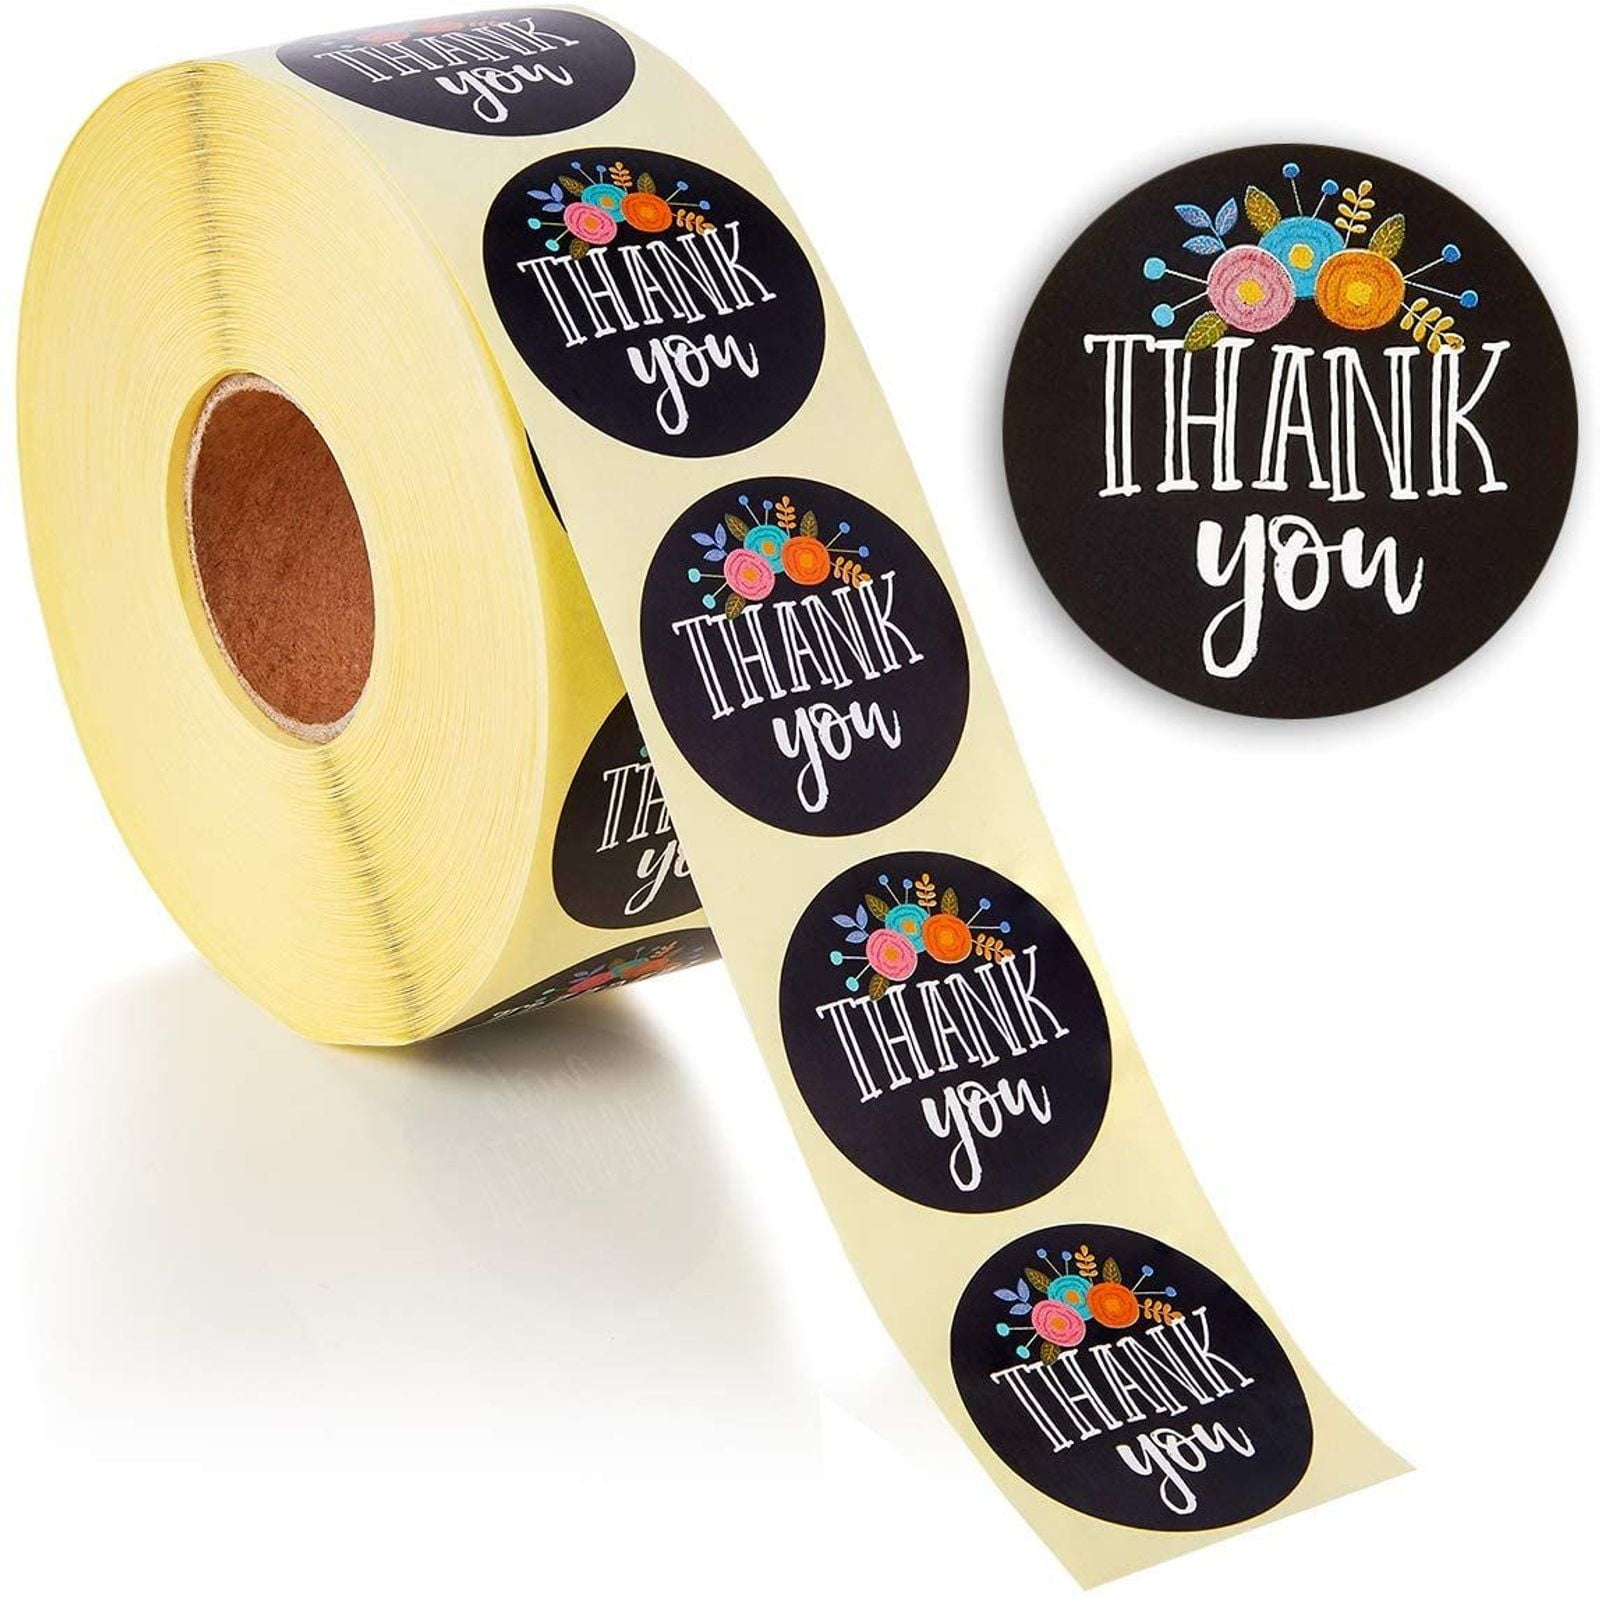 Thank you for your shopping Stickers Pink Business Gifts Seal Labels Stationery